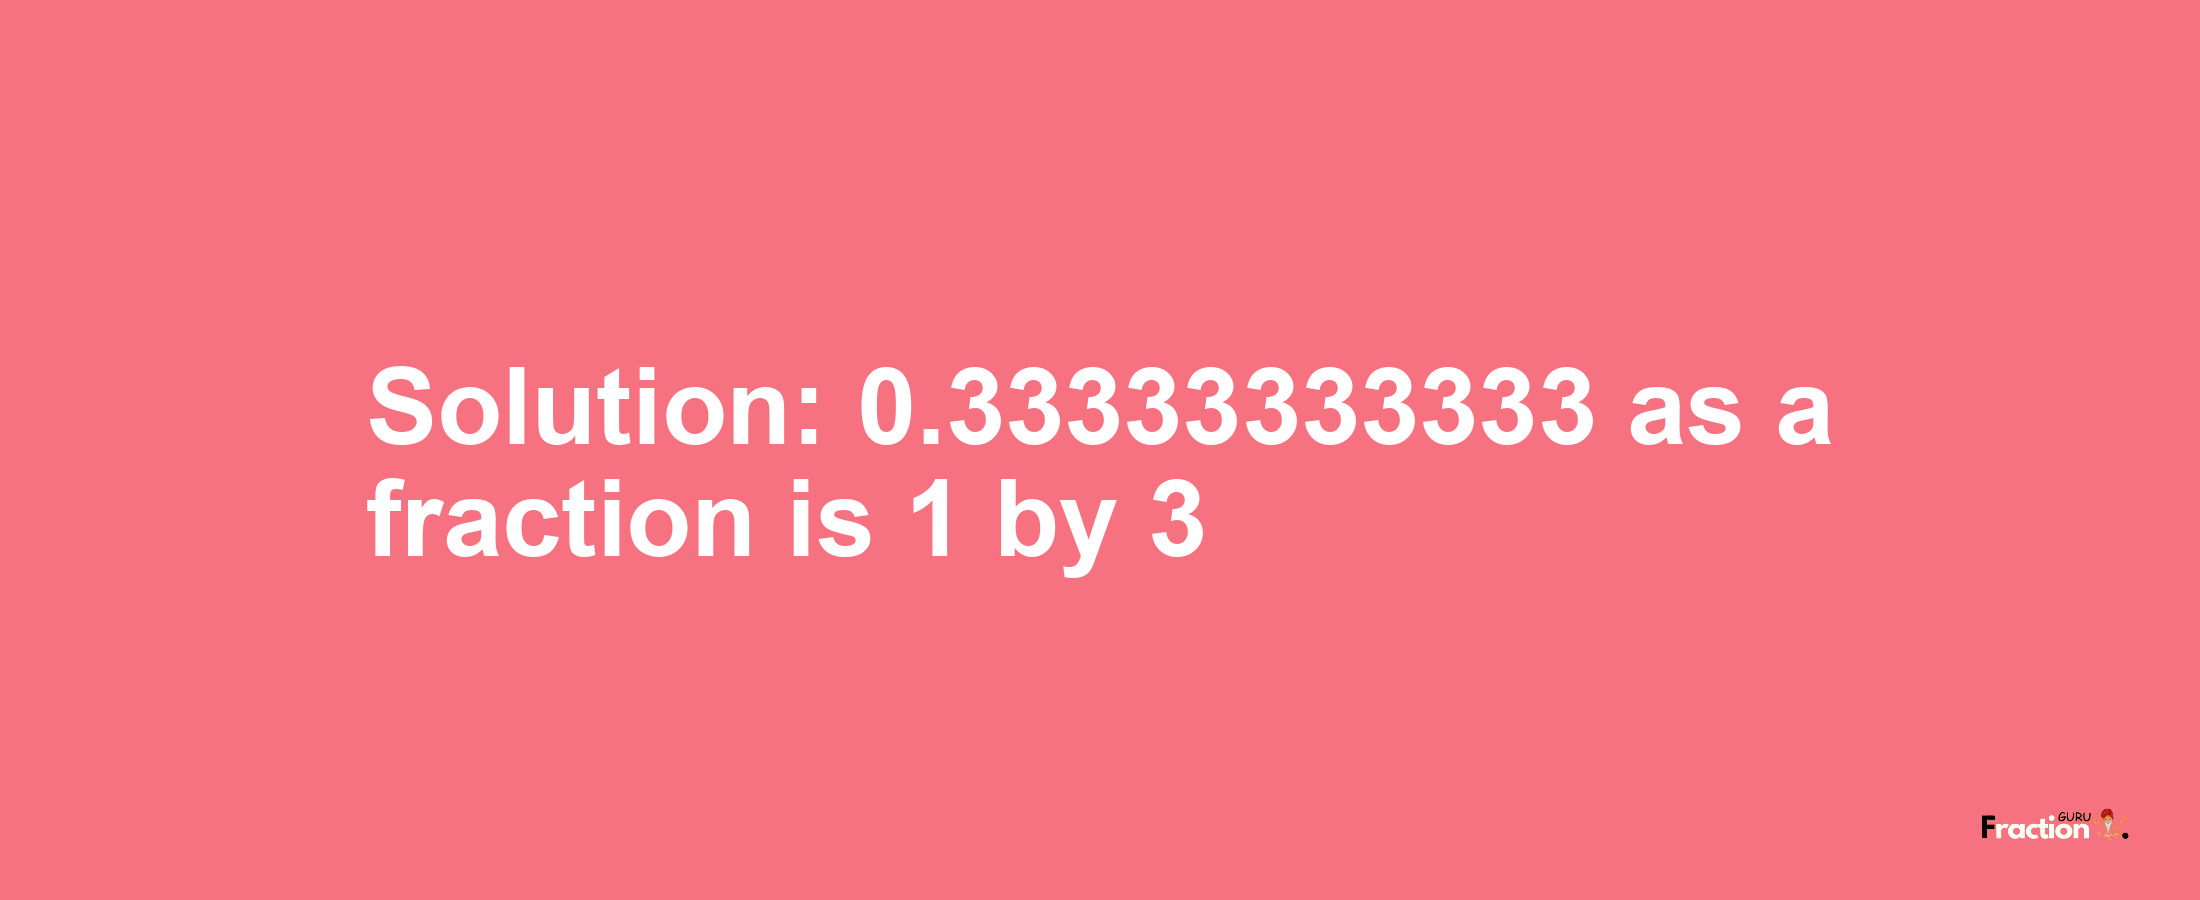 Solution:0.33333333333 as a fraction is 1/3